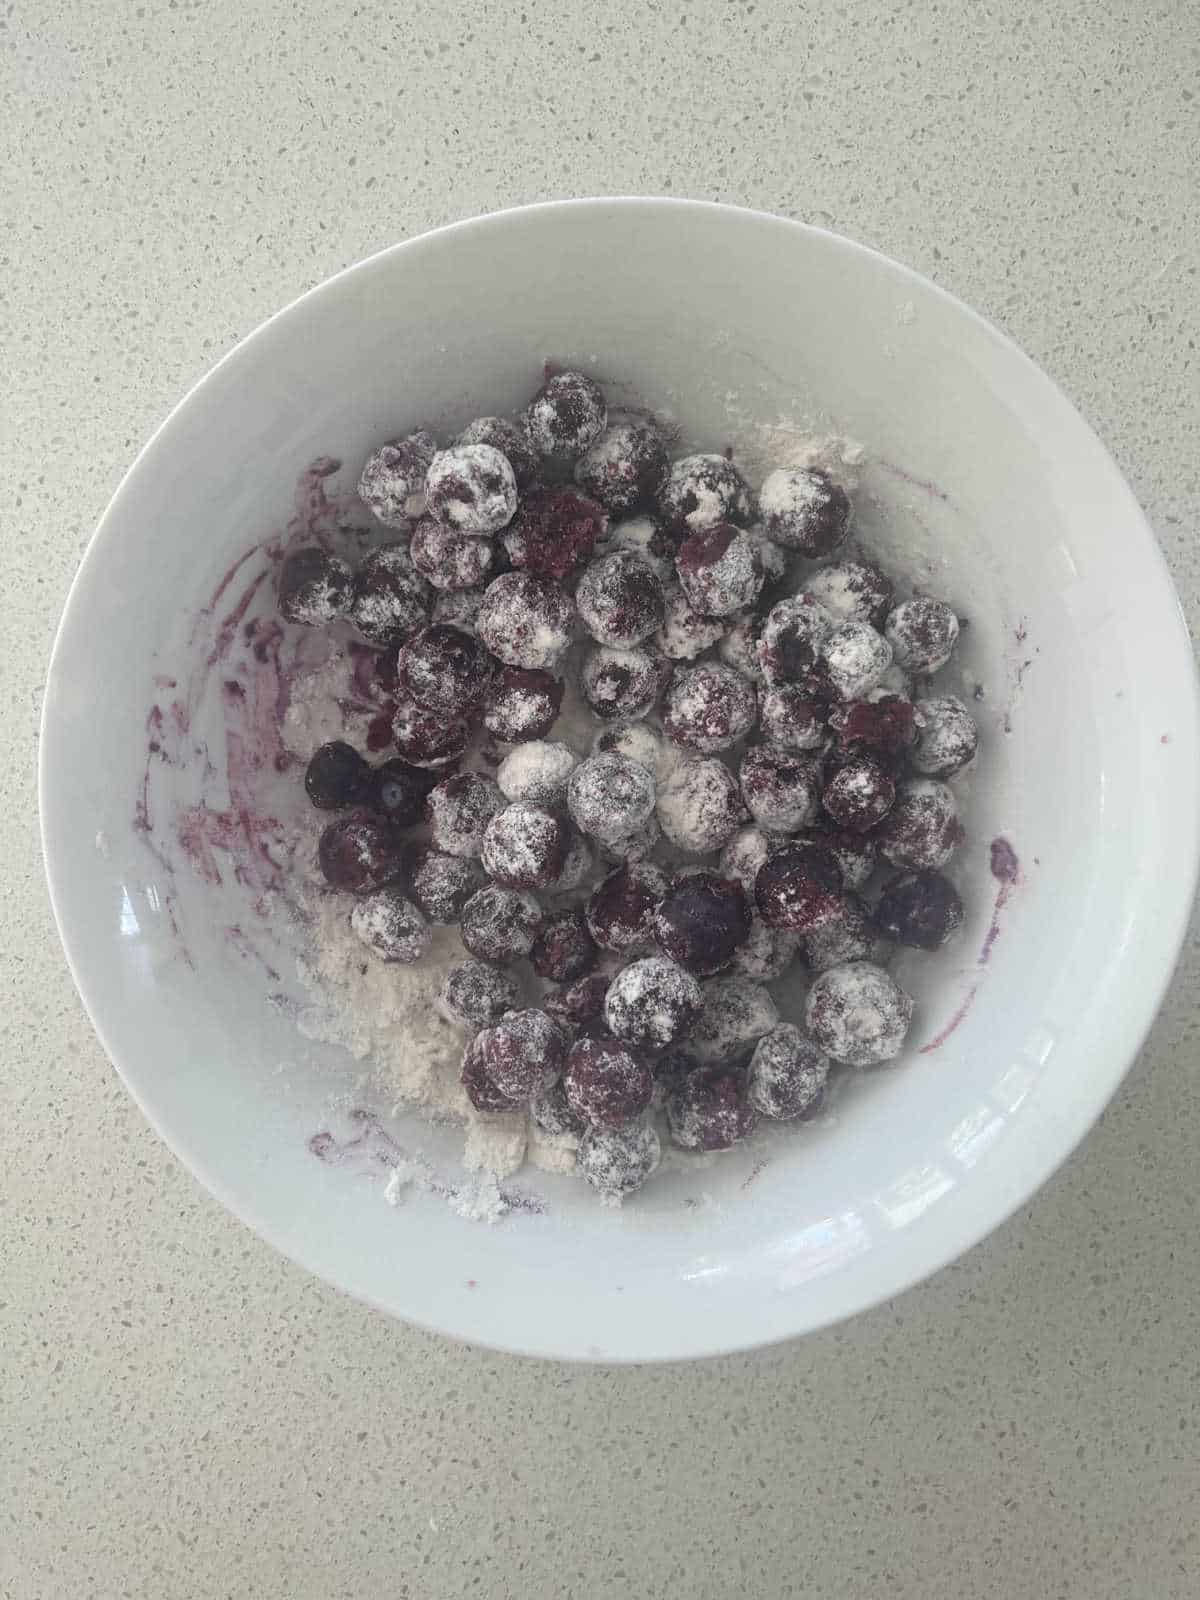 Blueberries in a bowl tossed in flour.